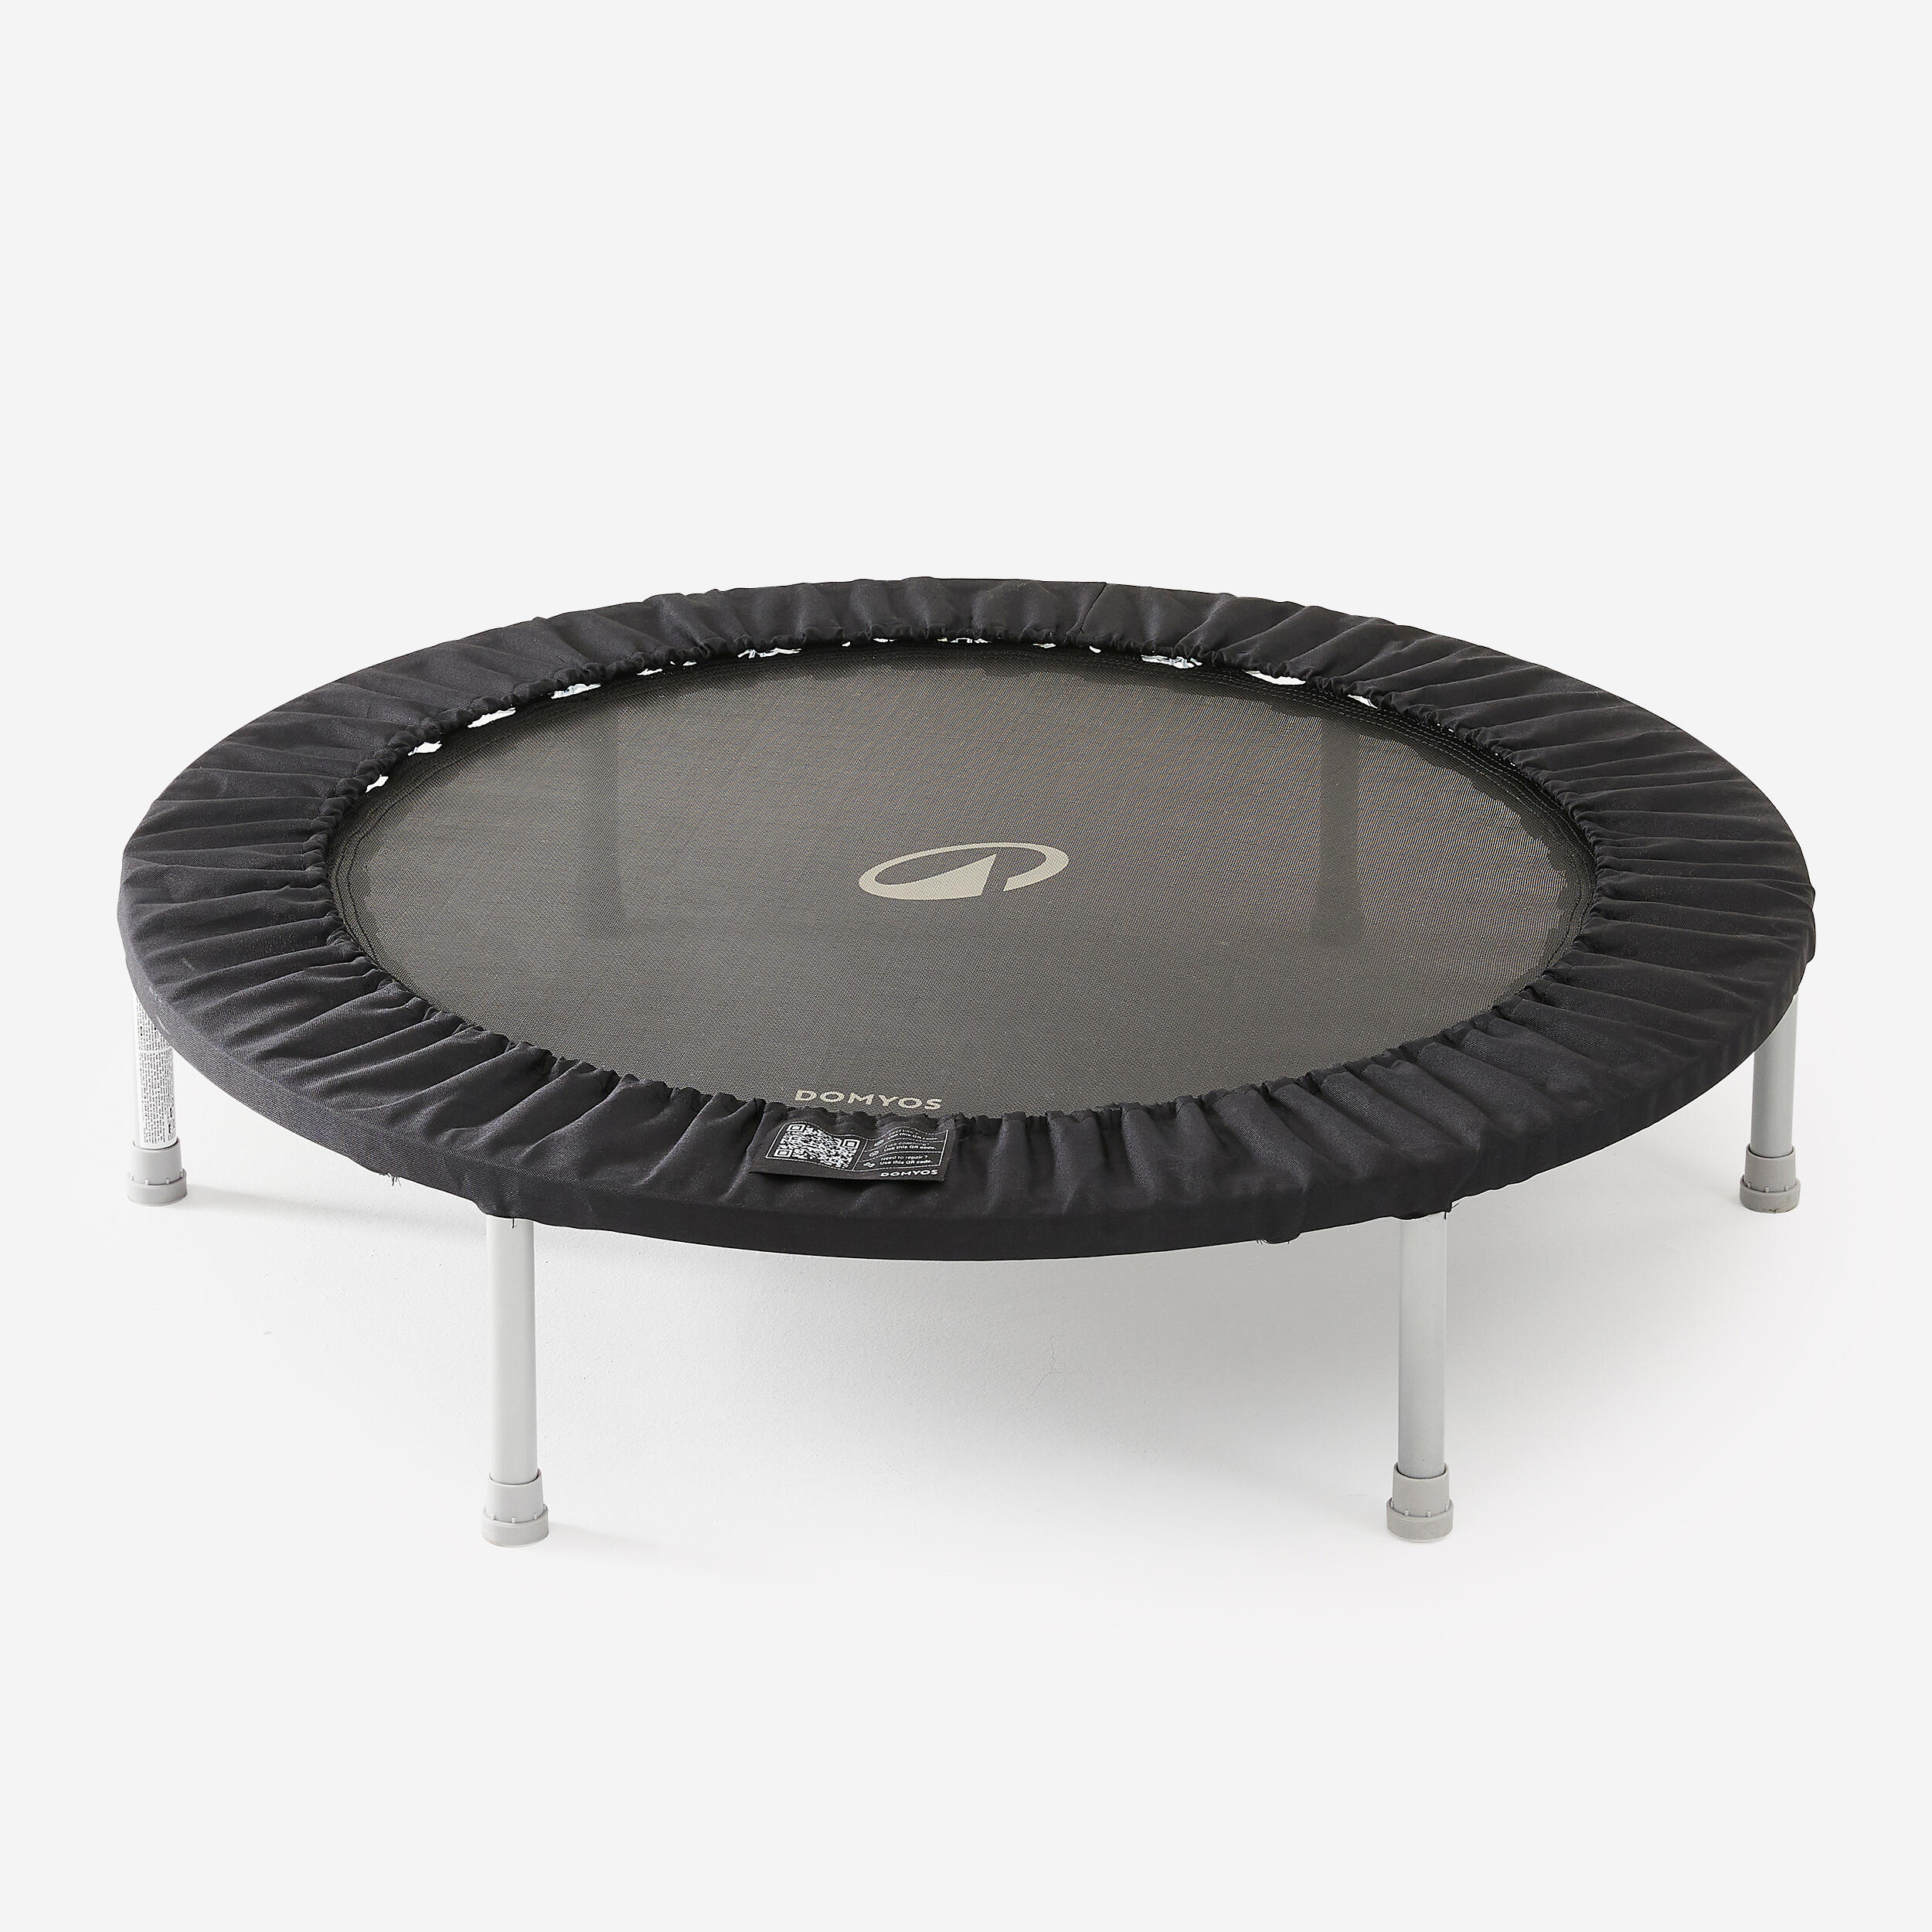 Image of Fitness Trampoline - Fit Trampo 100